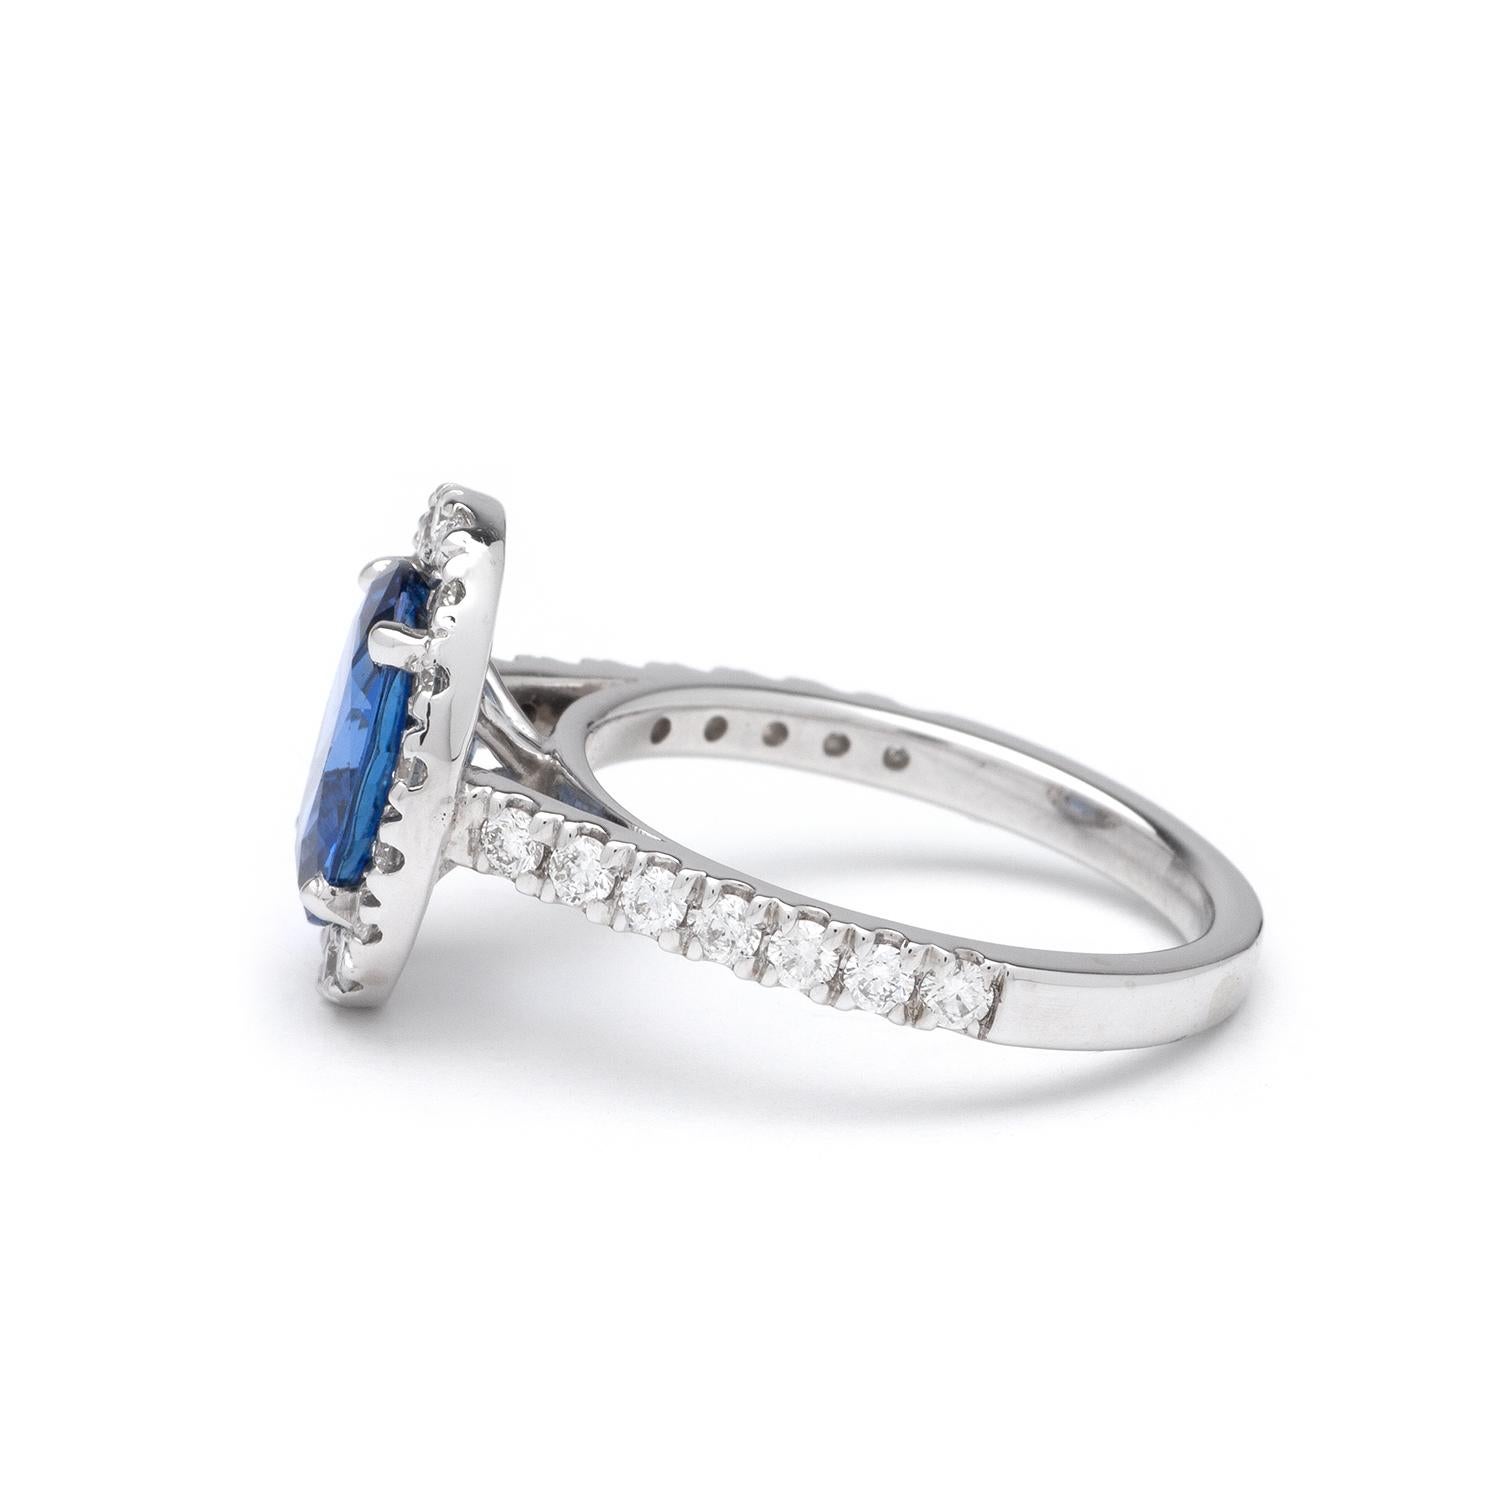 This ring features a halo design of G color, SI1 clarity, and 0.72ct Round side diamonds set in 14K white gold. The center gemstone is a 2.73ct Oval blue sapphire measuring 10.29 x 7.72mm. Finger size 6 1/2.